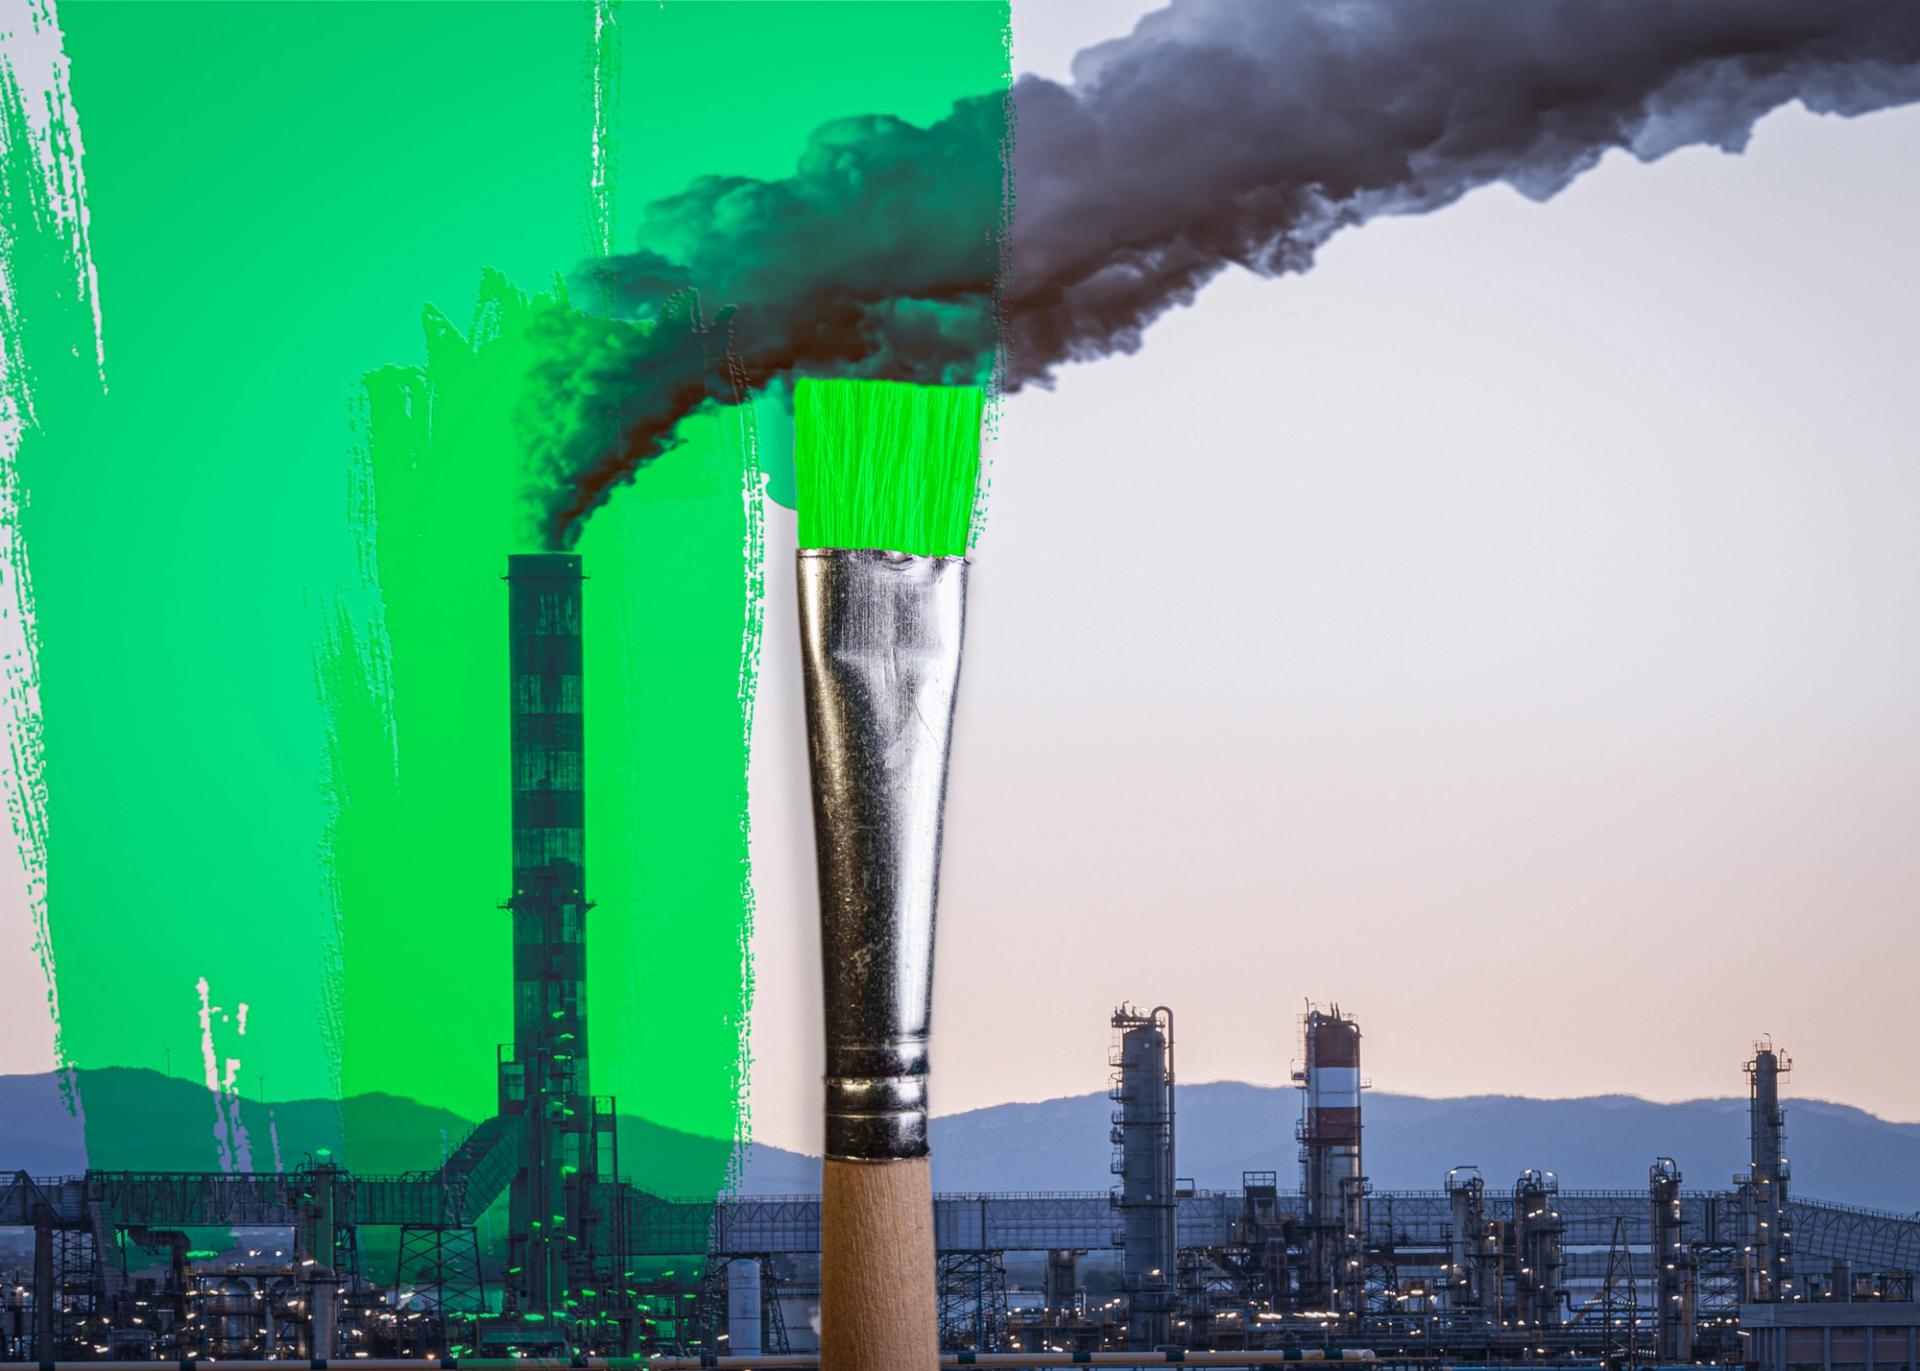 A photo collage showing an industrial smoke stack or chimney, with a paintbrush overlaying the photo with green paint